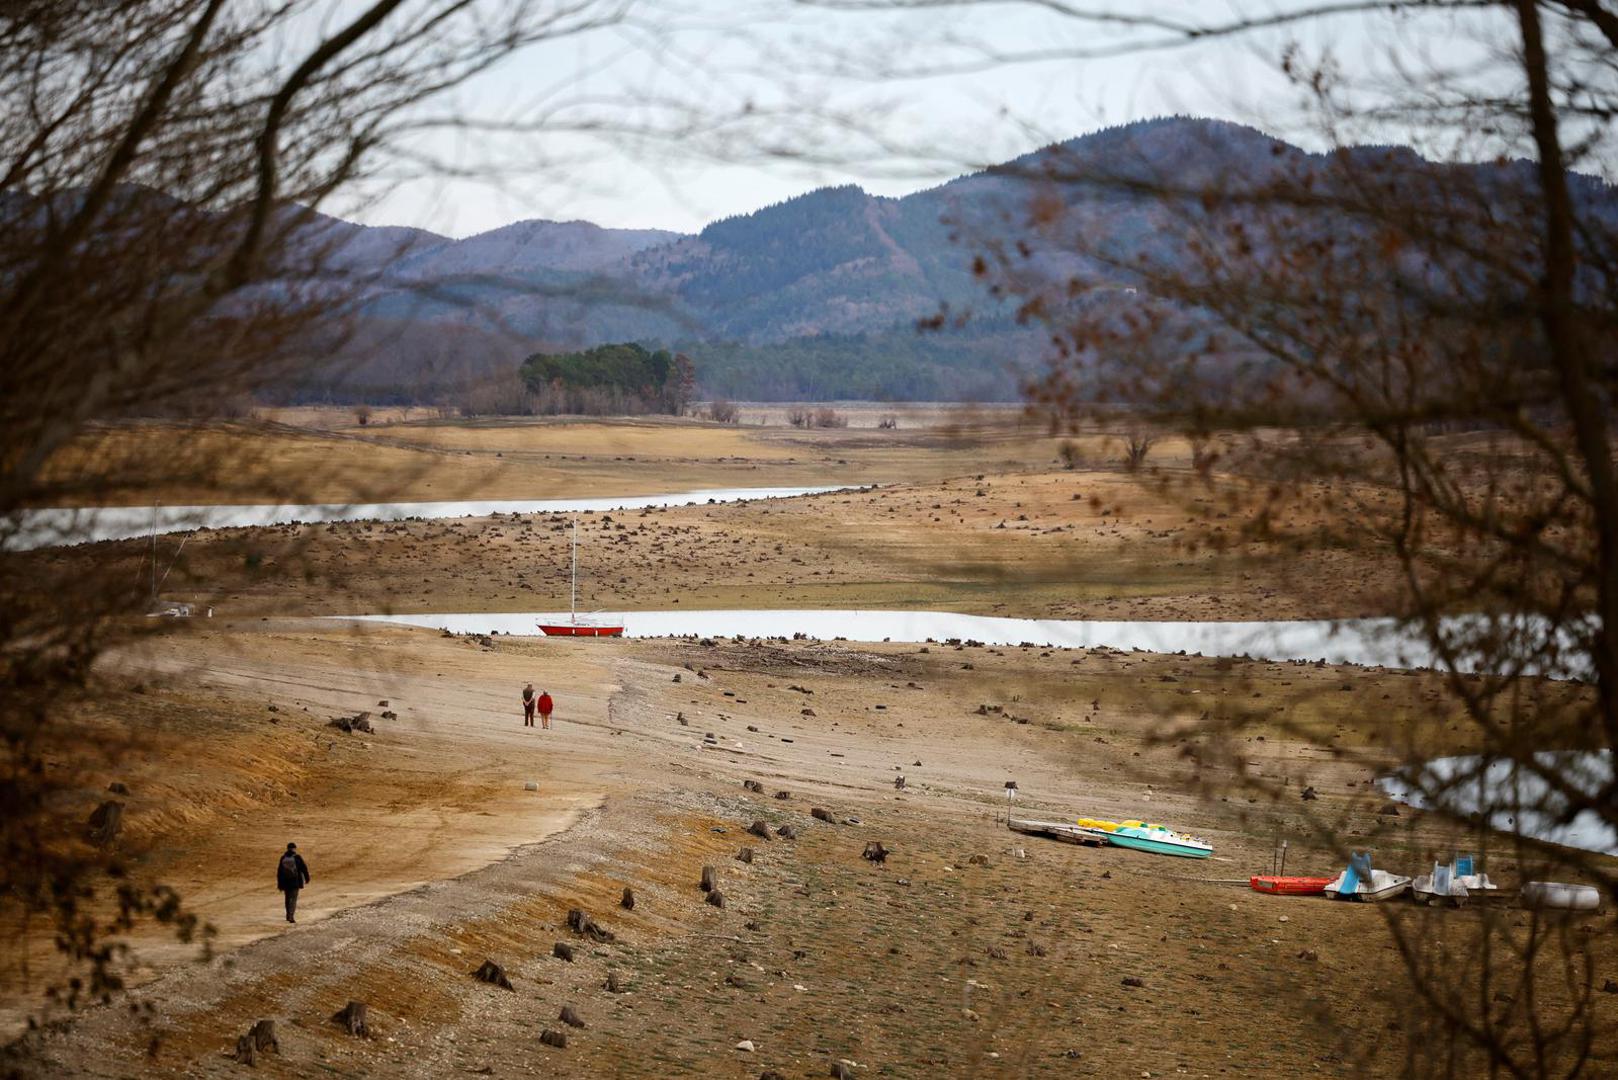 People walk on the banks of the partially dry Lake Montbel at the foot of the Pyrenees Mountains as France faces records winter dry spell raising fears of another summer of droughts and water restrictions, March 13, 2023. REUTERS/Sarah Meyssonnier Photo: Sarah Meyssonnier/REUTERS